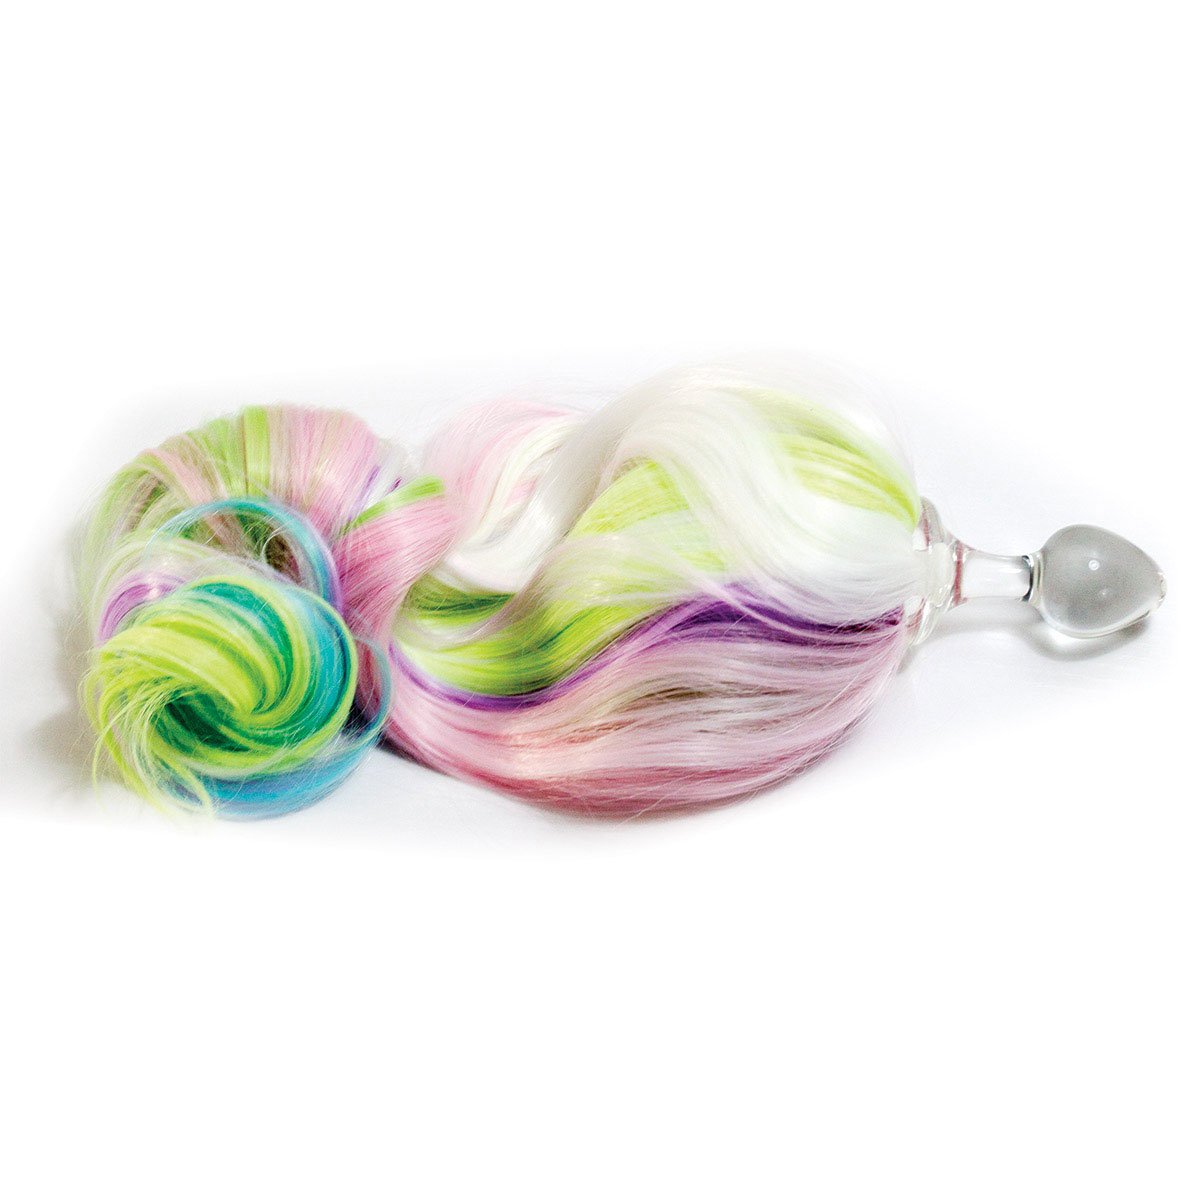 Crystal Delights My Lil Pony Tail Pastel Rainbow - Buy At Luxury Toy X - Free 3-Day Shipping